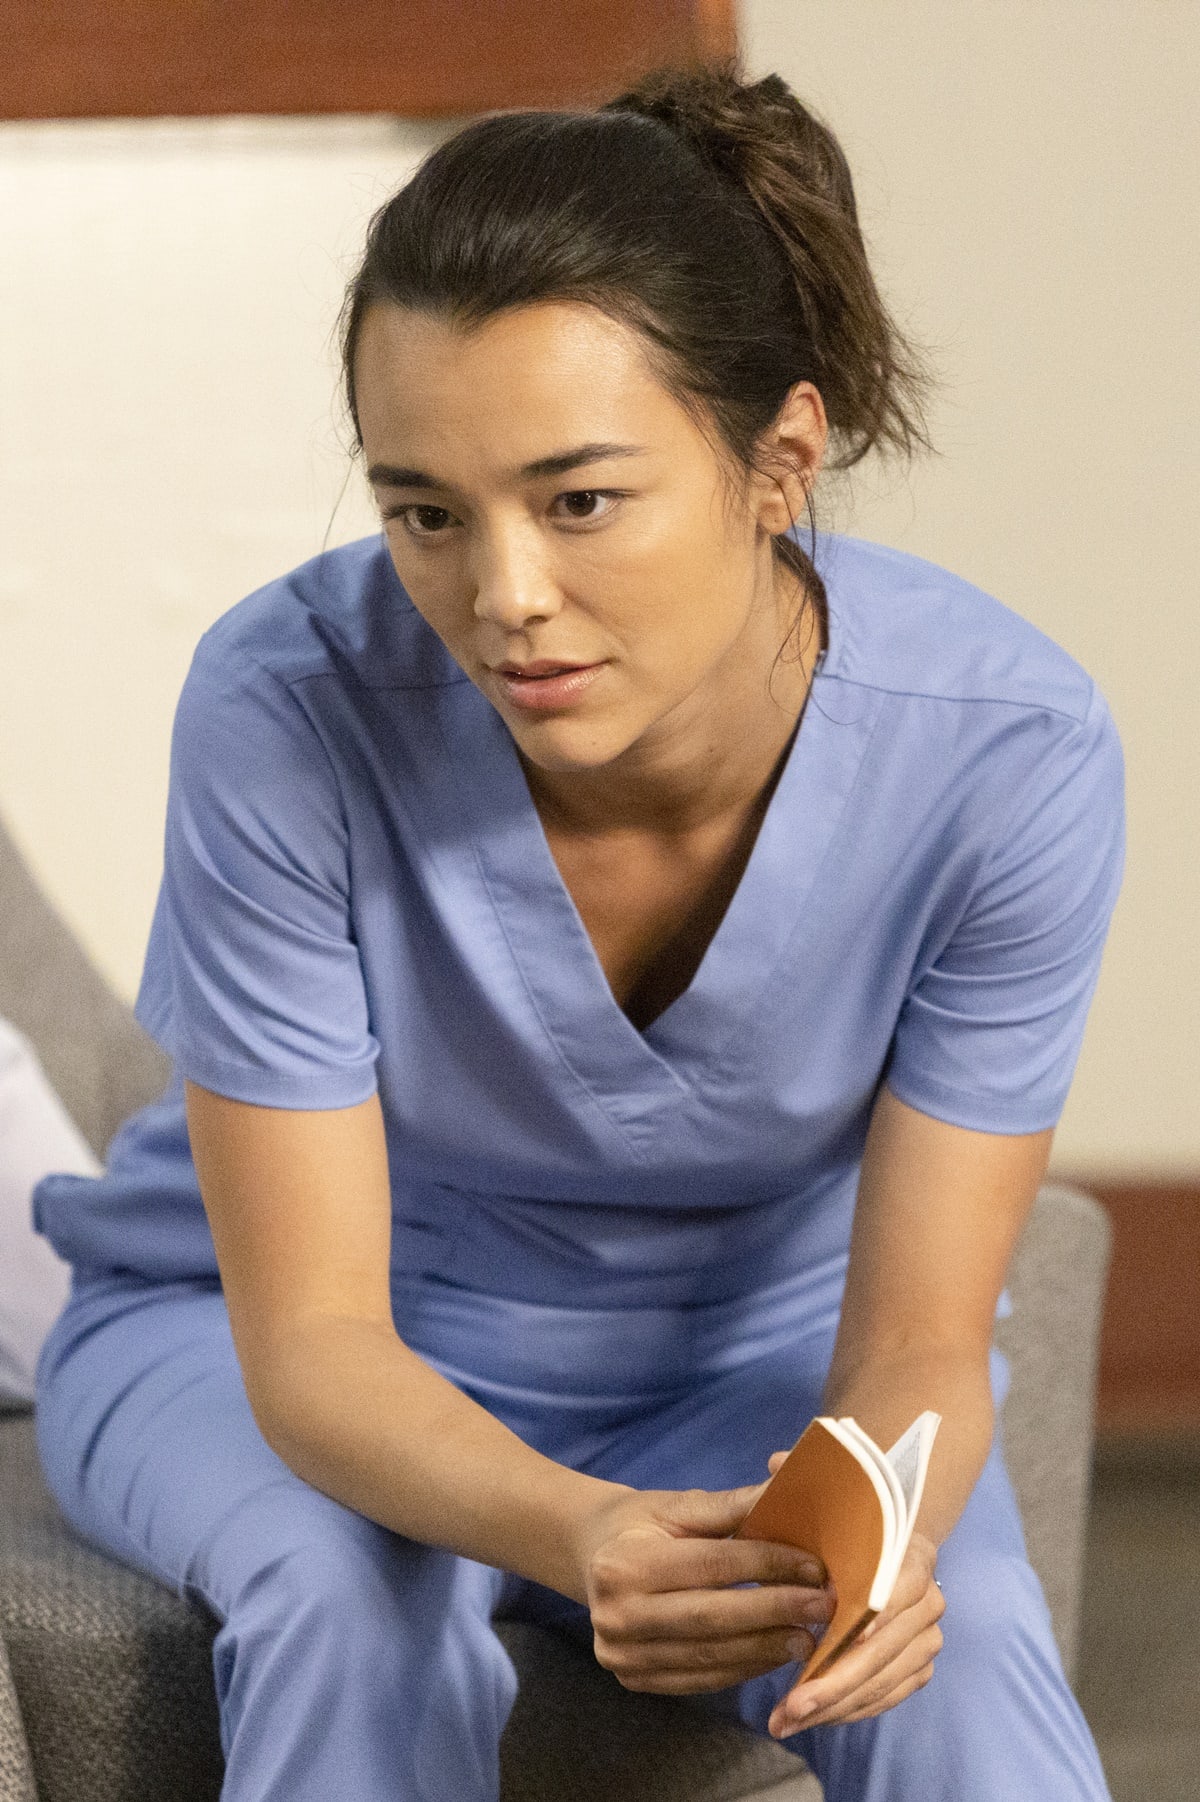 It was announced in July 2022 that Midori Francis had been cast as a series regular for the 19th season of the medical drama Grey's Anatomy on ABC